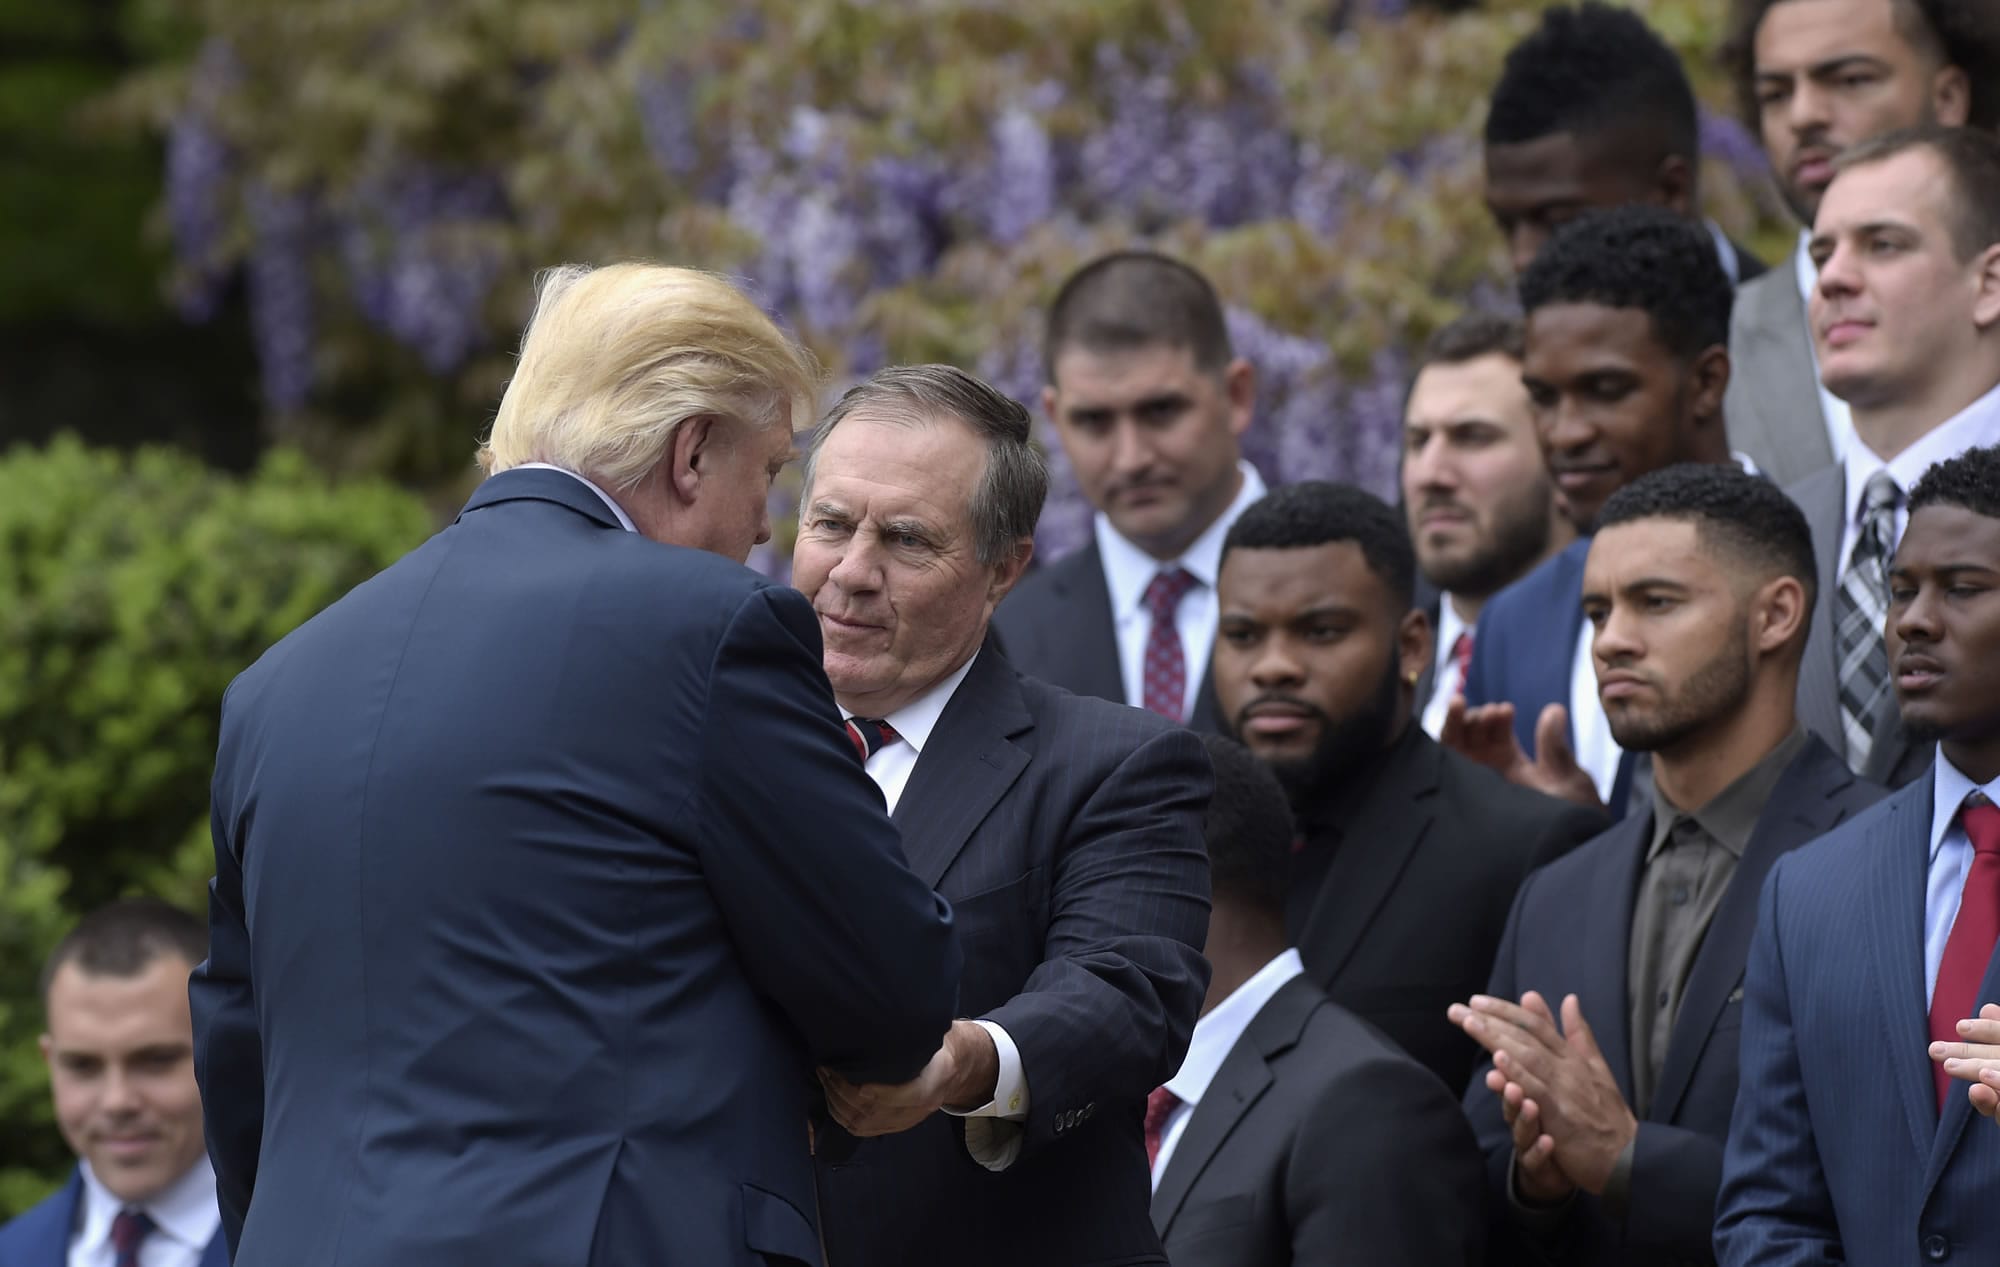 President Donald Trump shakes hands with New England Patriots head coach Bill Belichick during a ceremony on the South Lawn of the White House in Washington, Wednesday, April 19, 2017, where the president honored the Super Bowl Champion New England Patriots for their Super Bowl LI victory.